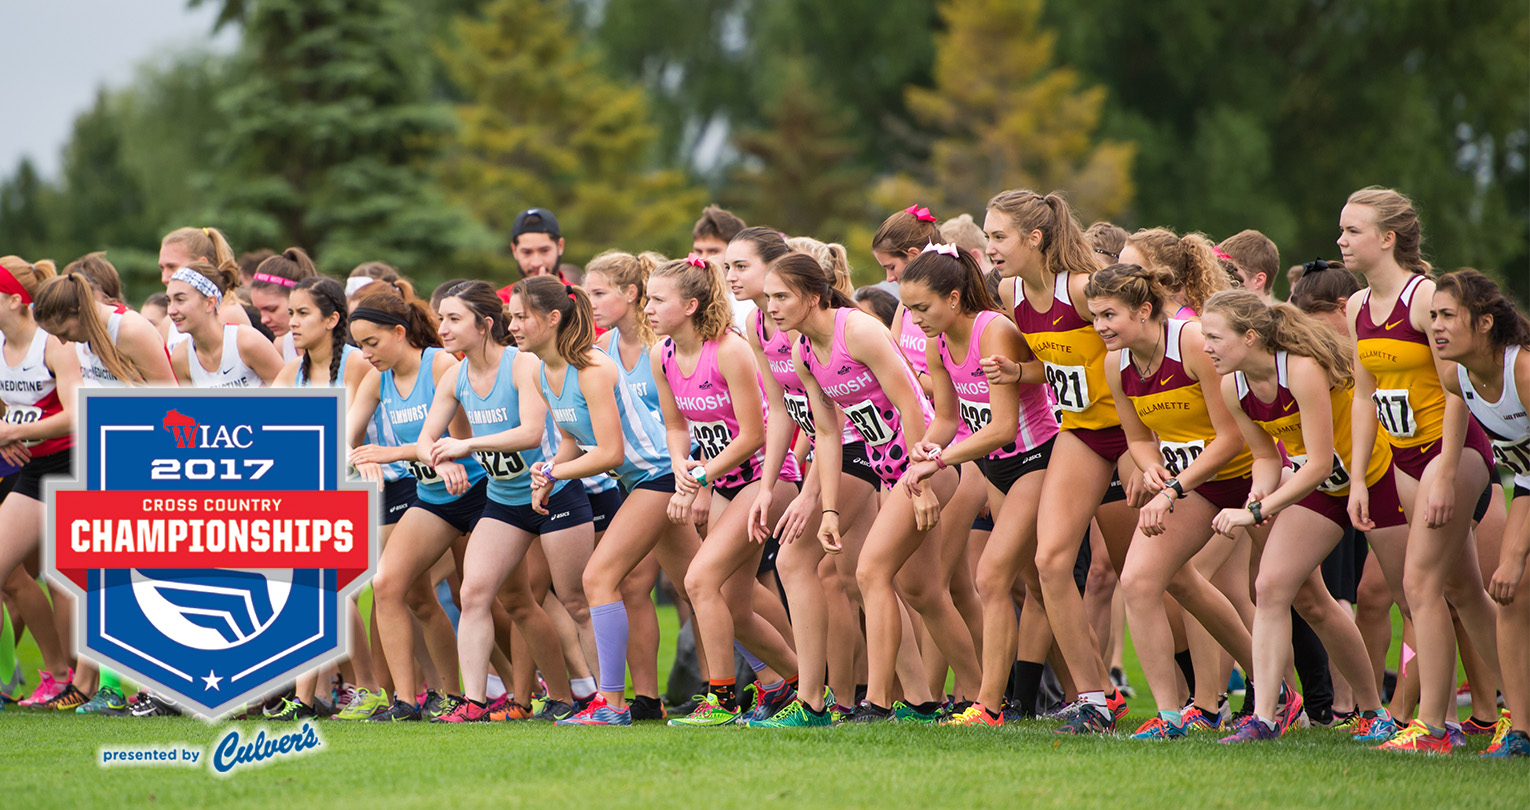 Moore Seeks Second Straight WIAC Cross Country Title